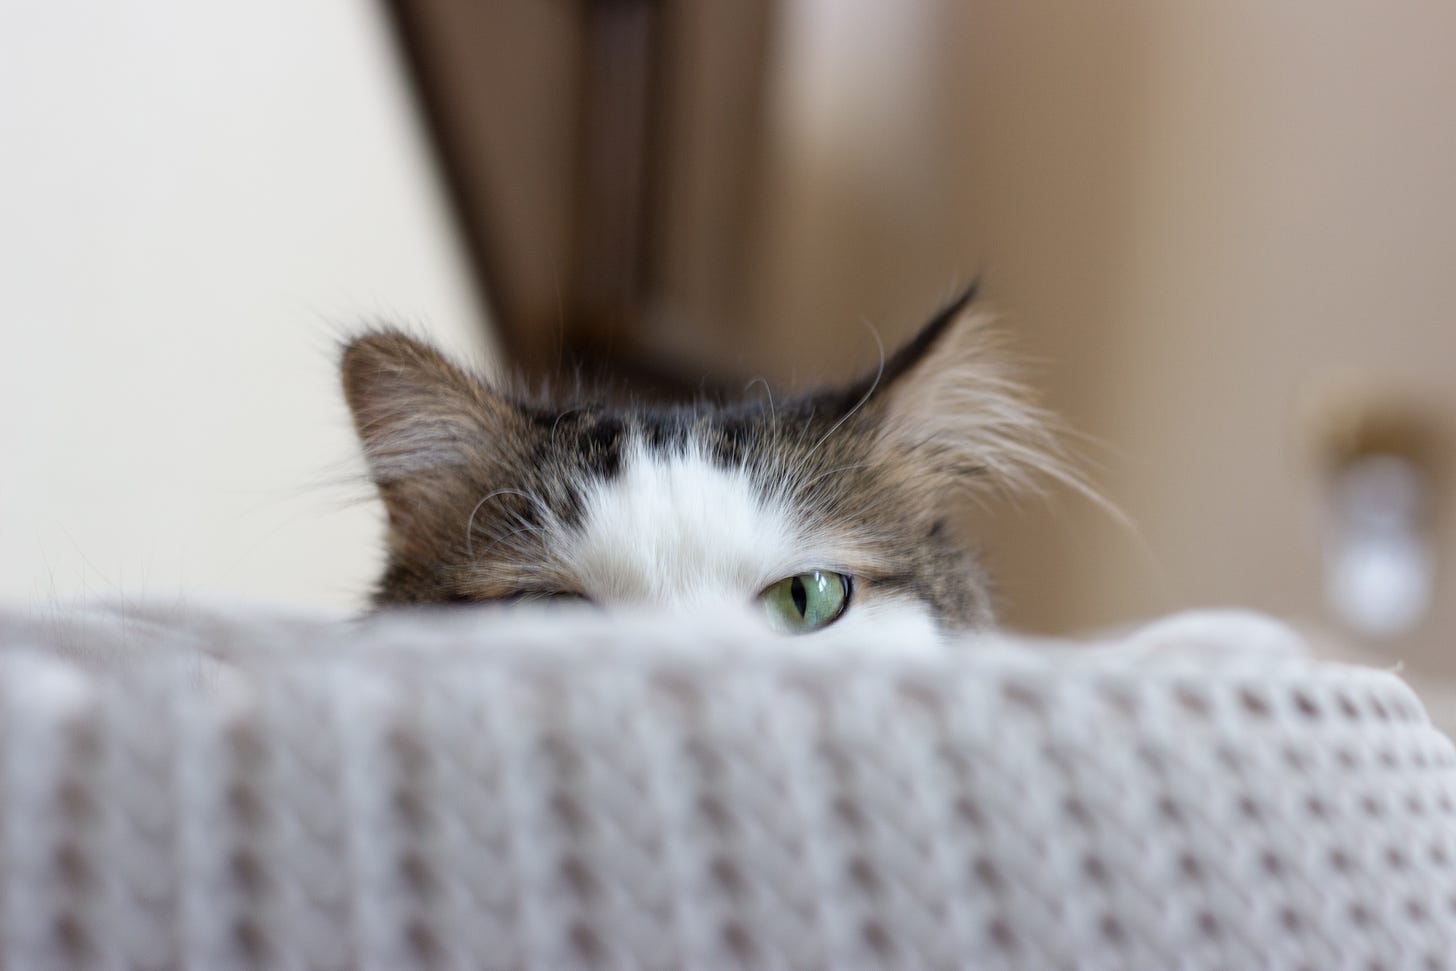 A grey and white cat peeking over a grey blanket on the back of a chair with a blurred background.